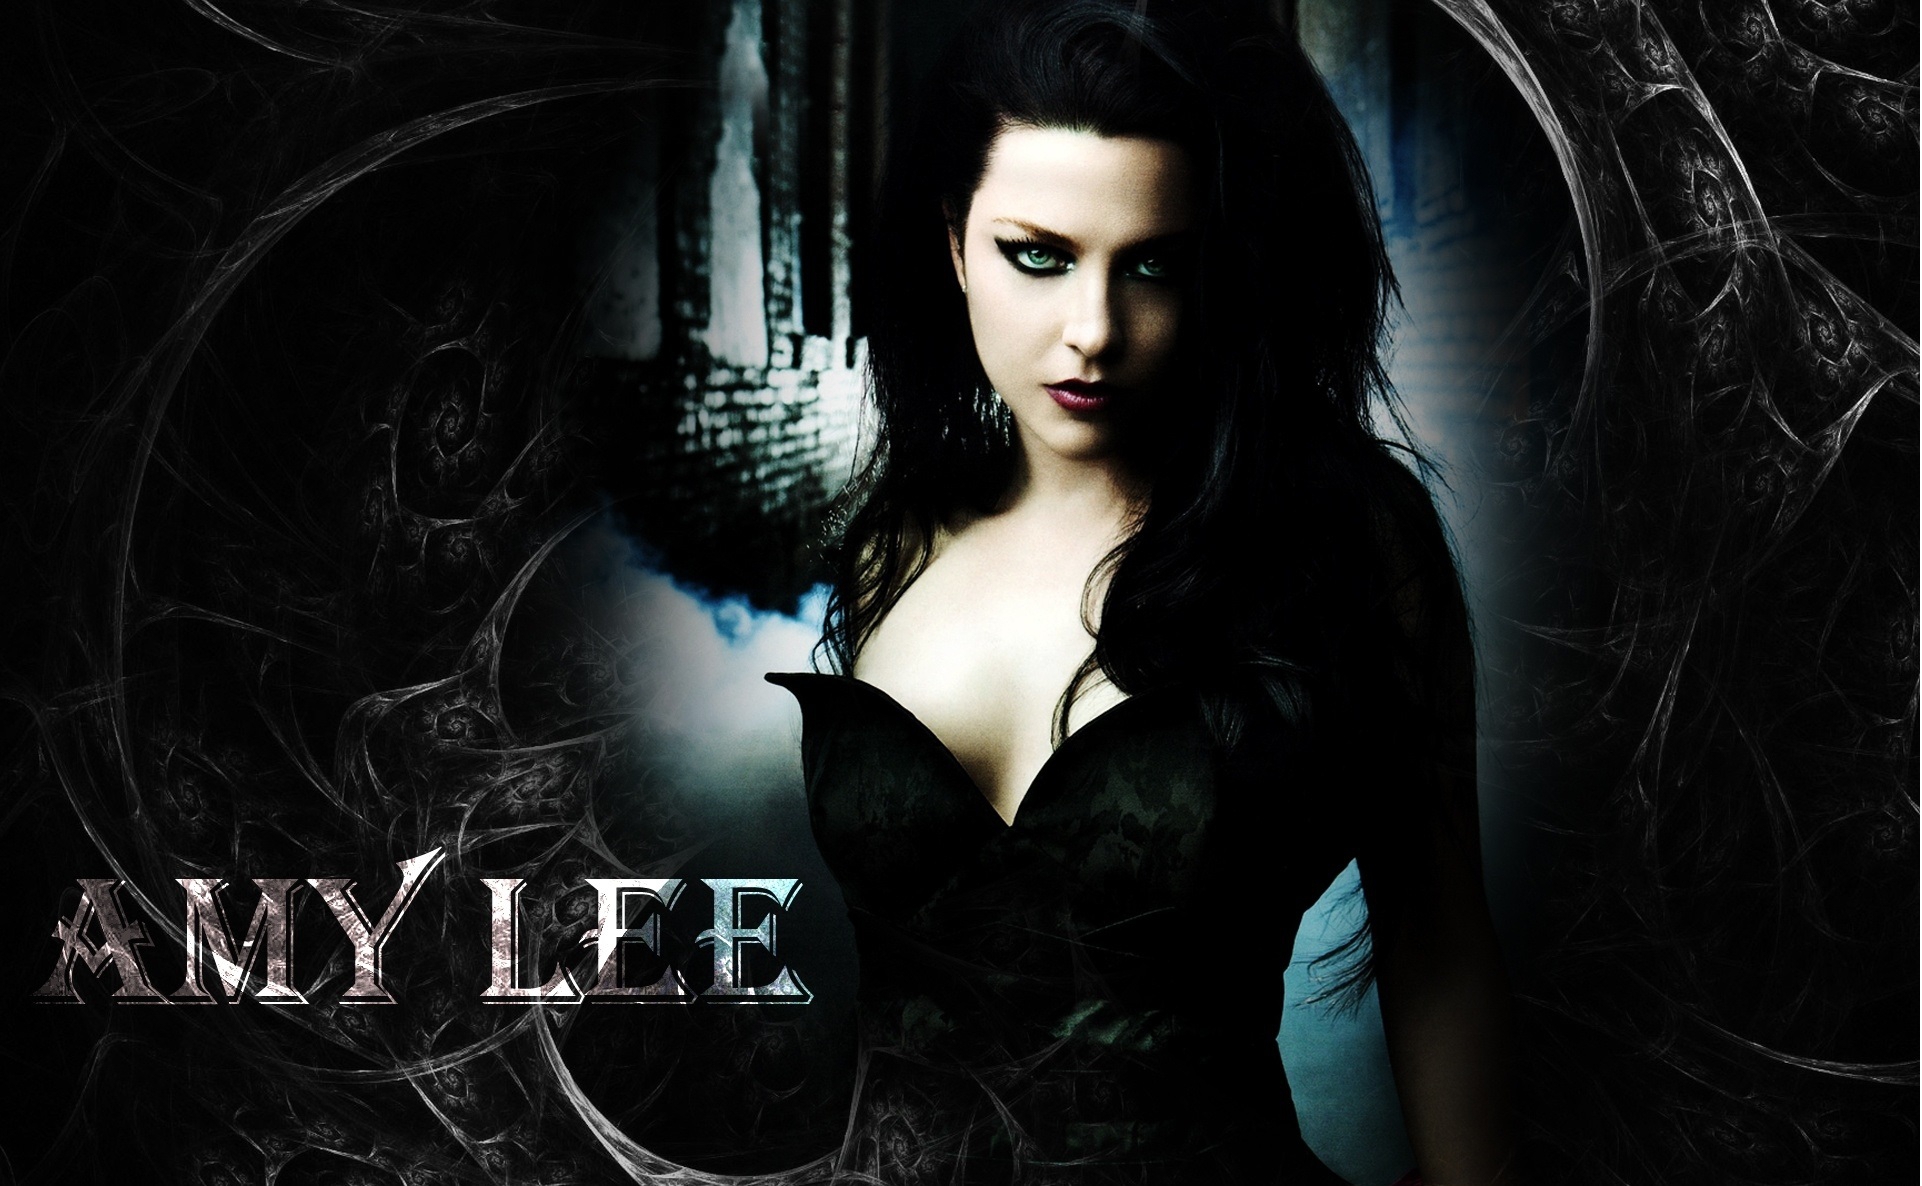 Evanescence Wallpapers Hd.